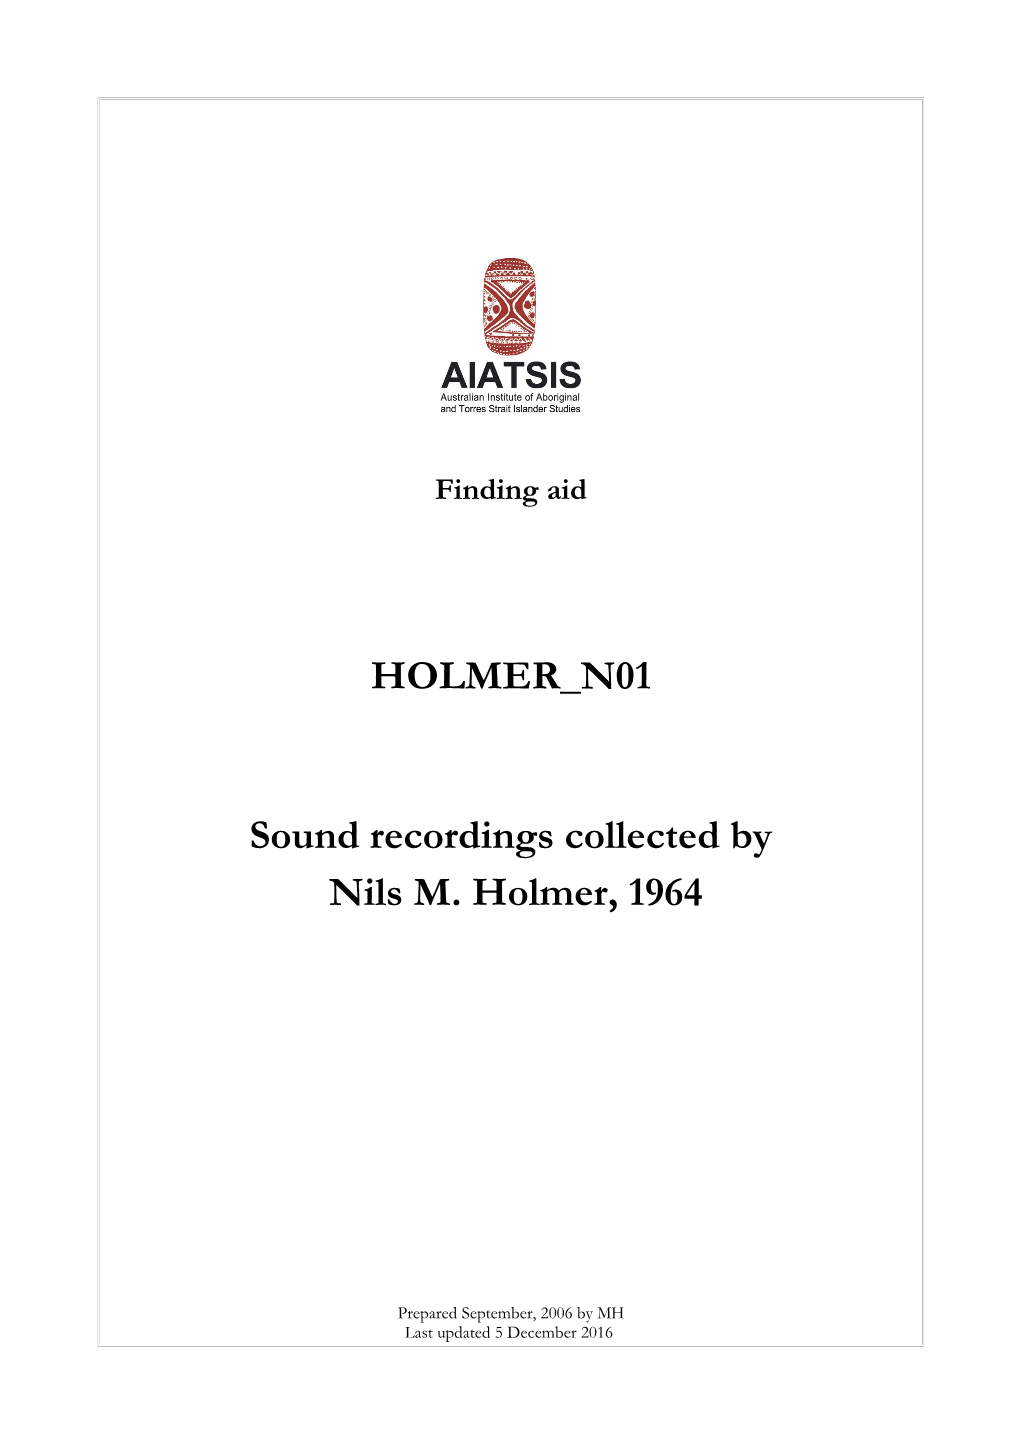 Guide to Sound Recordings Collected by Nils M. Holmer